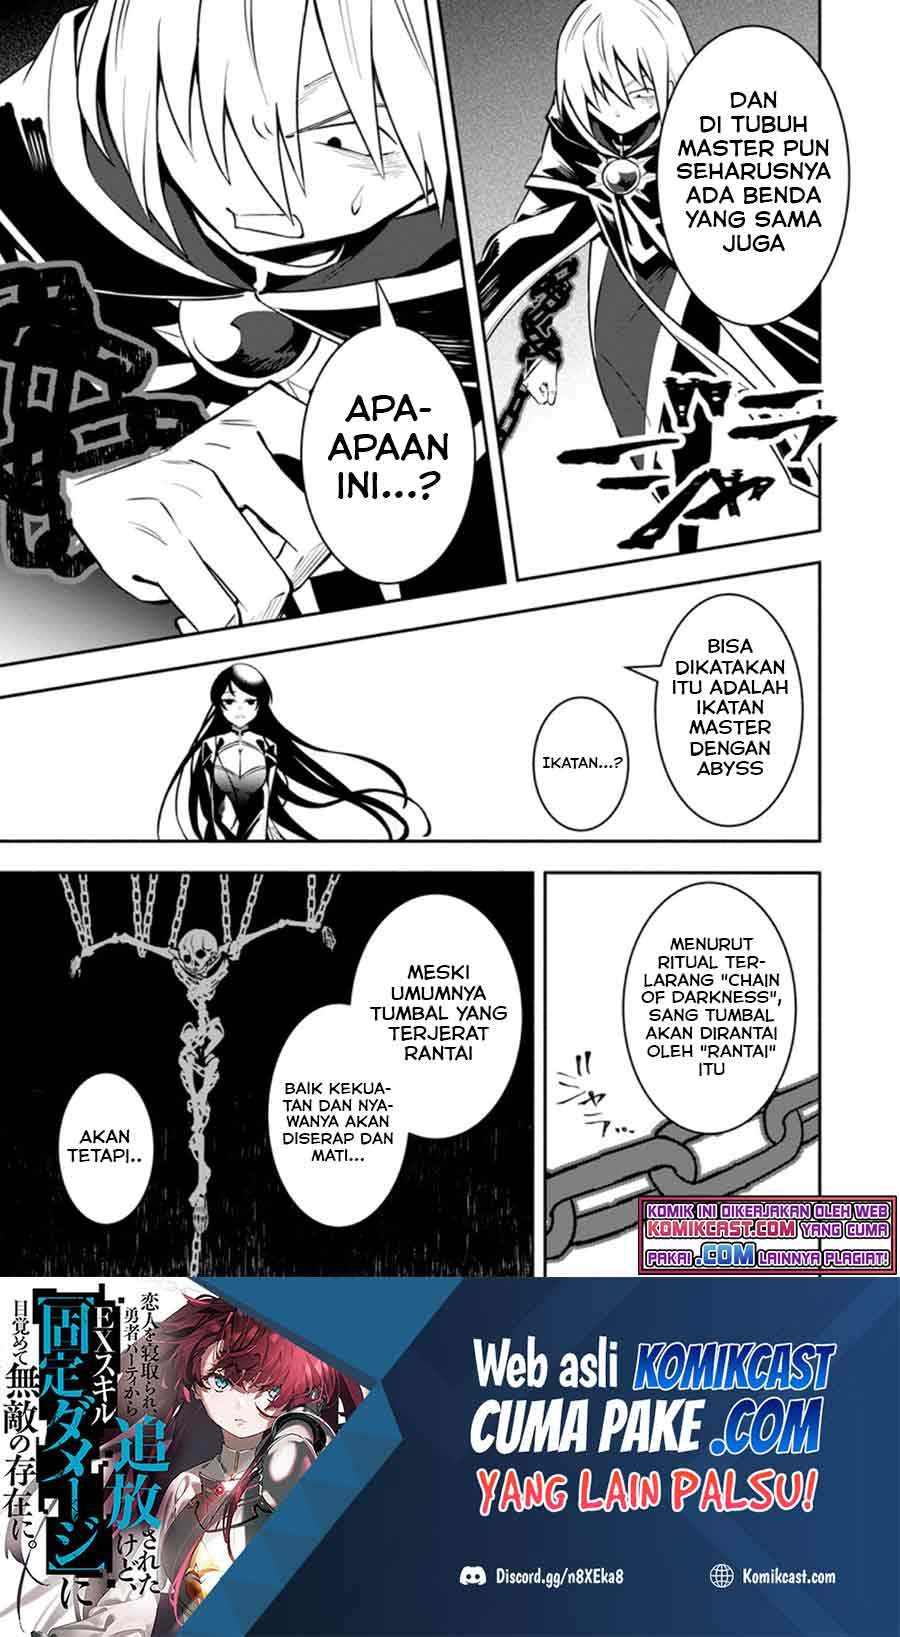 My Lover Was Stolen, And I Was Kicked Out Of The Hero’s Party, But I Awakened To The EX Skill “Fixed Damage” And Became Invincible. Now, Let’s Begin Some Revenge Chapter 09.2 Bahasa Indonesia